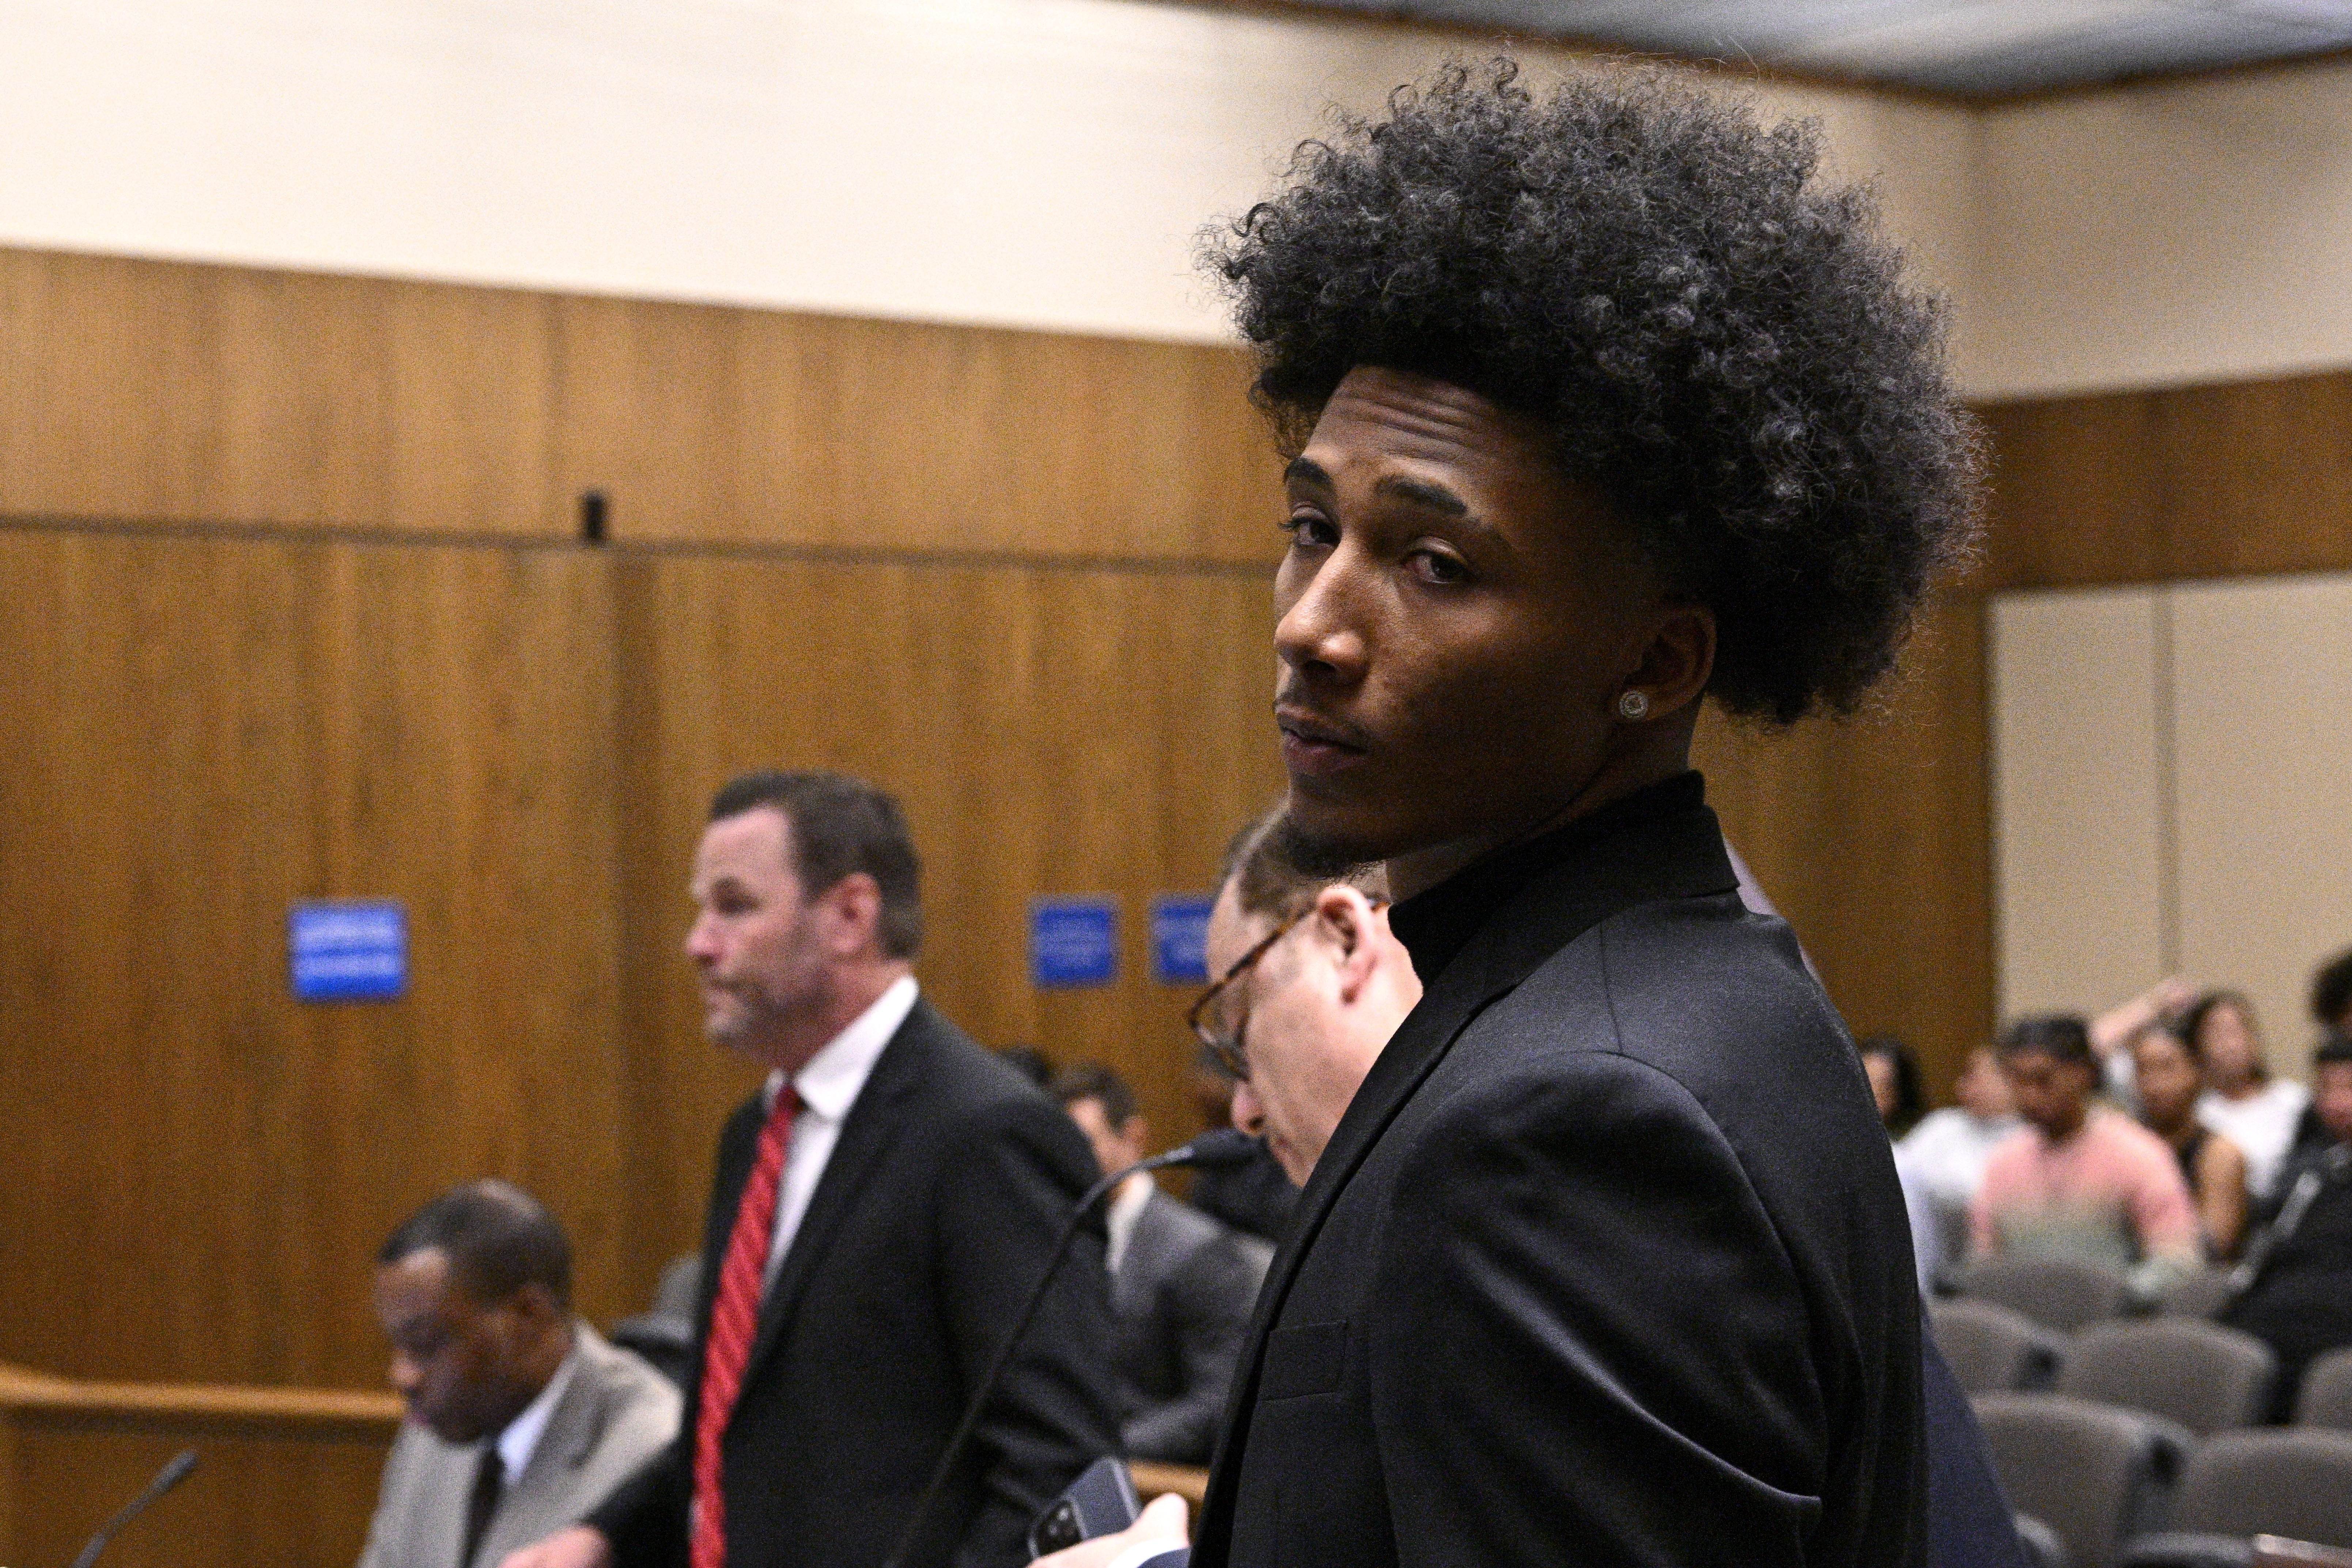 Judge denies request to raise Mikey Williams' bail and sets trial